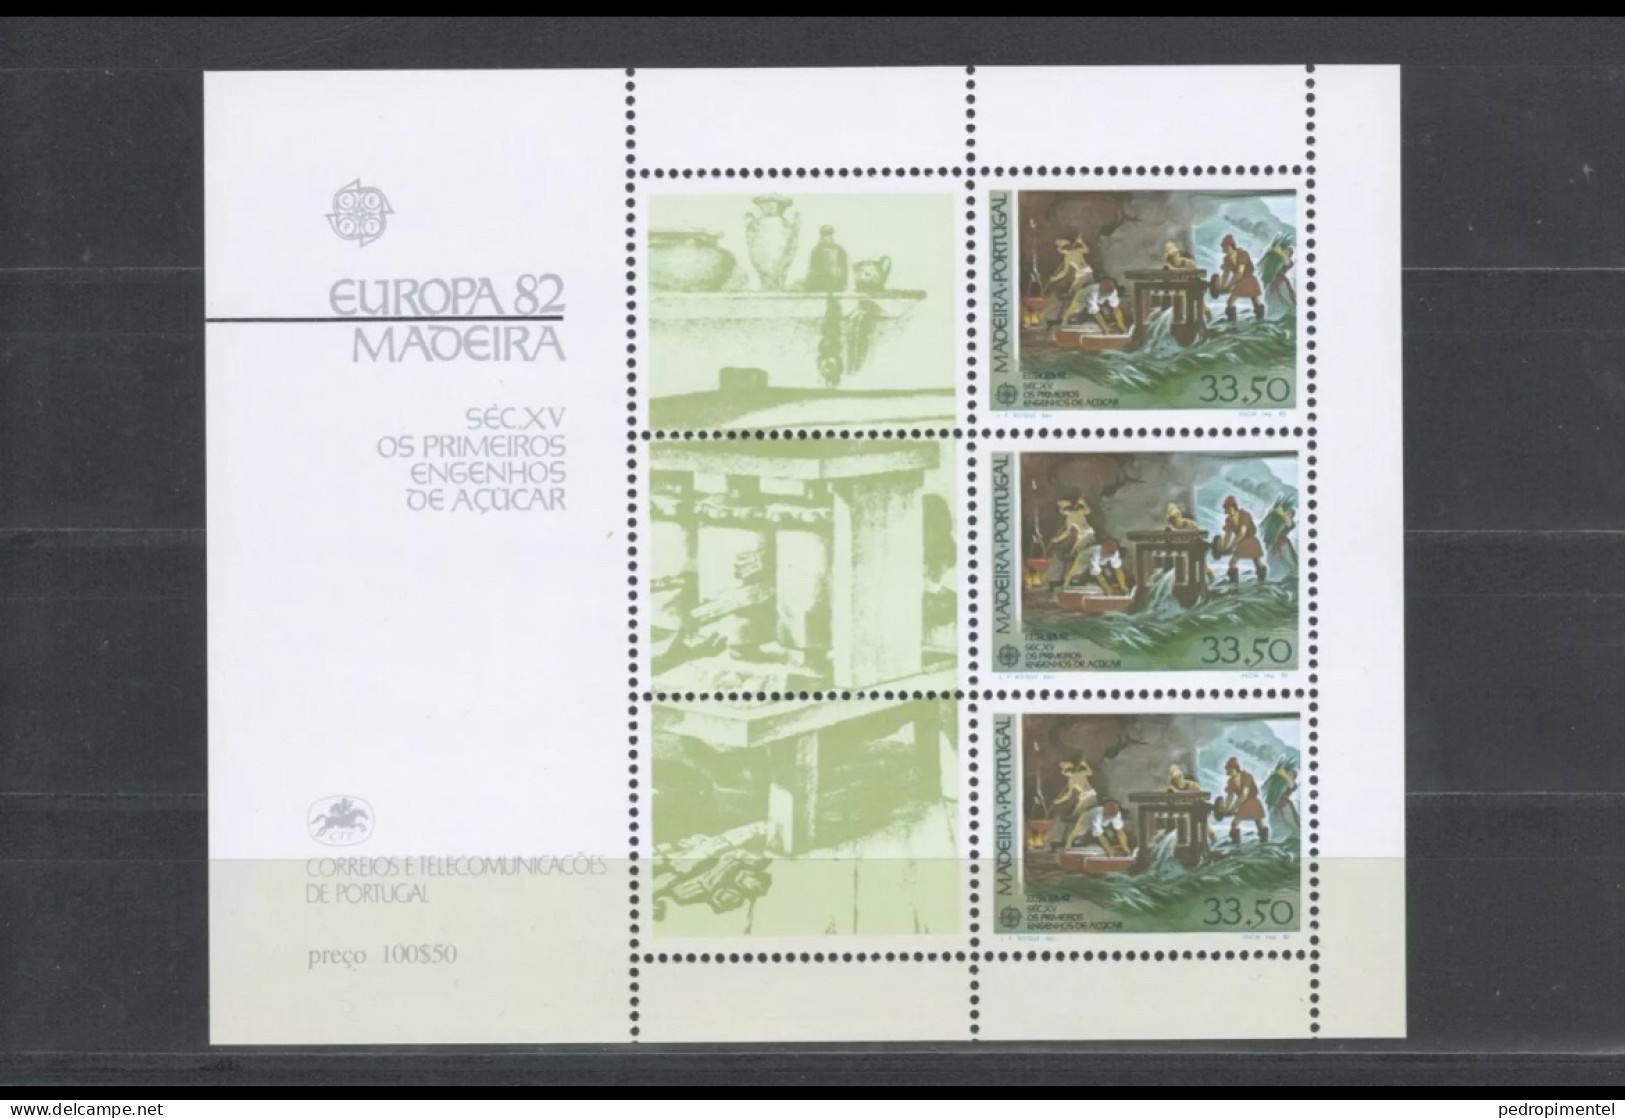 Portugal Azores Madeira 1982 "Europa CEPT Historical Events" Condition MNH OG Mundifil #1569-1571 (3 Minisheets) - Ungebraucht